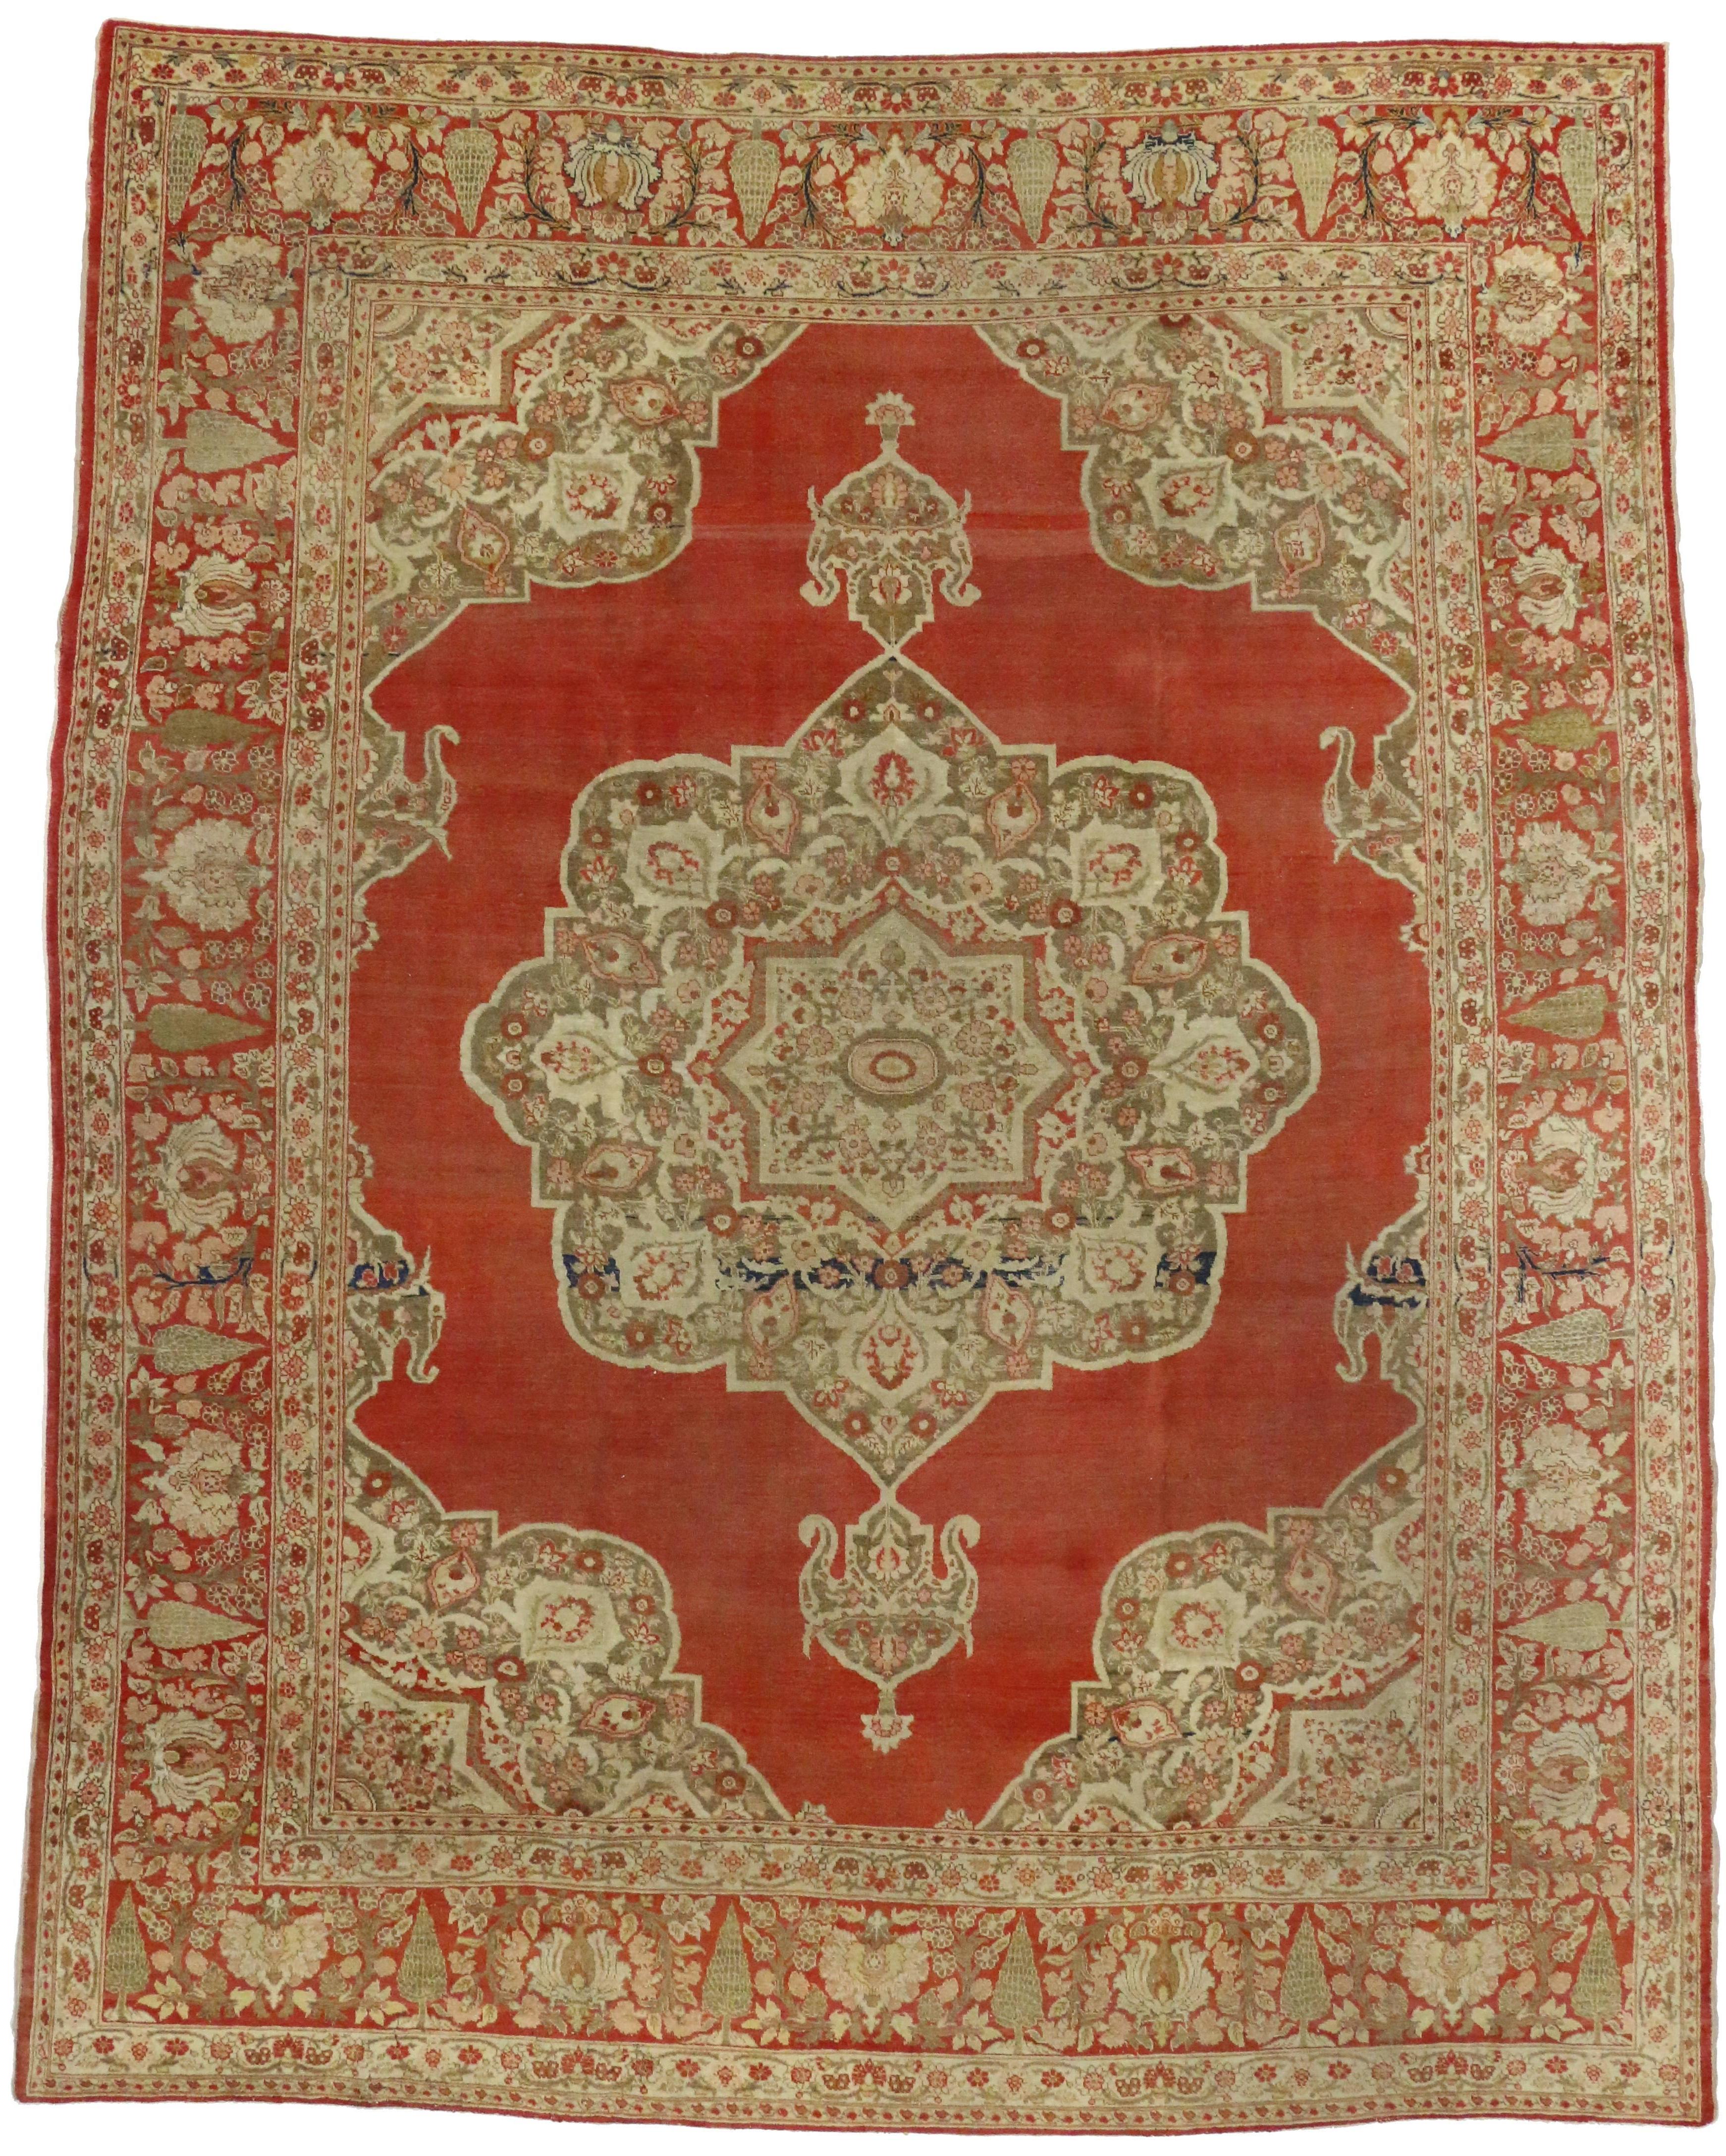 74140 Haji Khalili Antique Persian Tabriz Rug with Tudor Manor House Style. This hand-knotted wool antique Haji Khalili Tabriz rug features an eight-point medallion inside a larger size eight-point cusped medallion floating in an open abrashed red